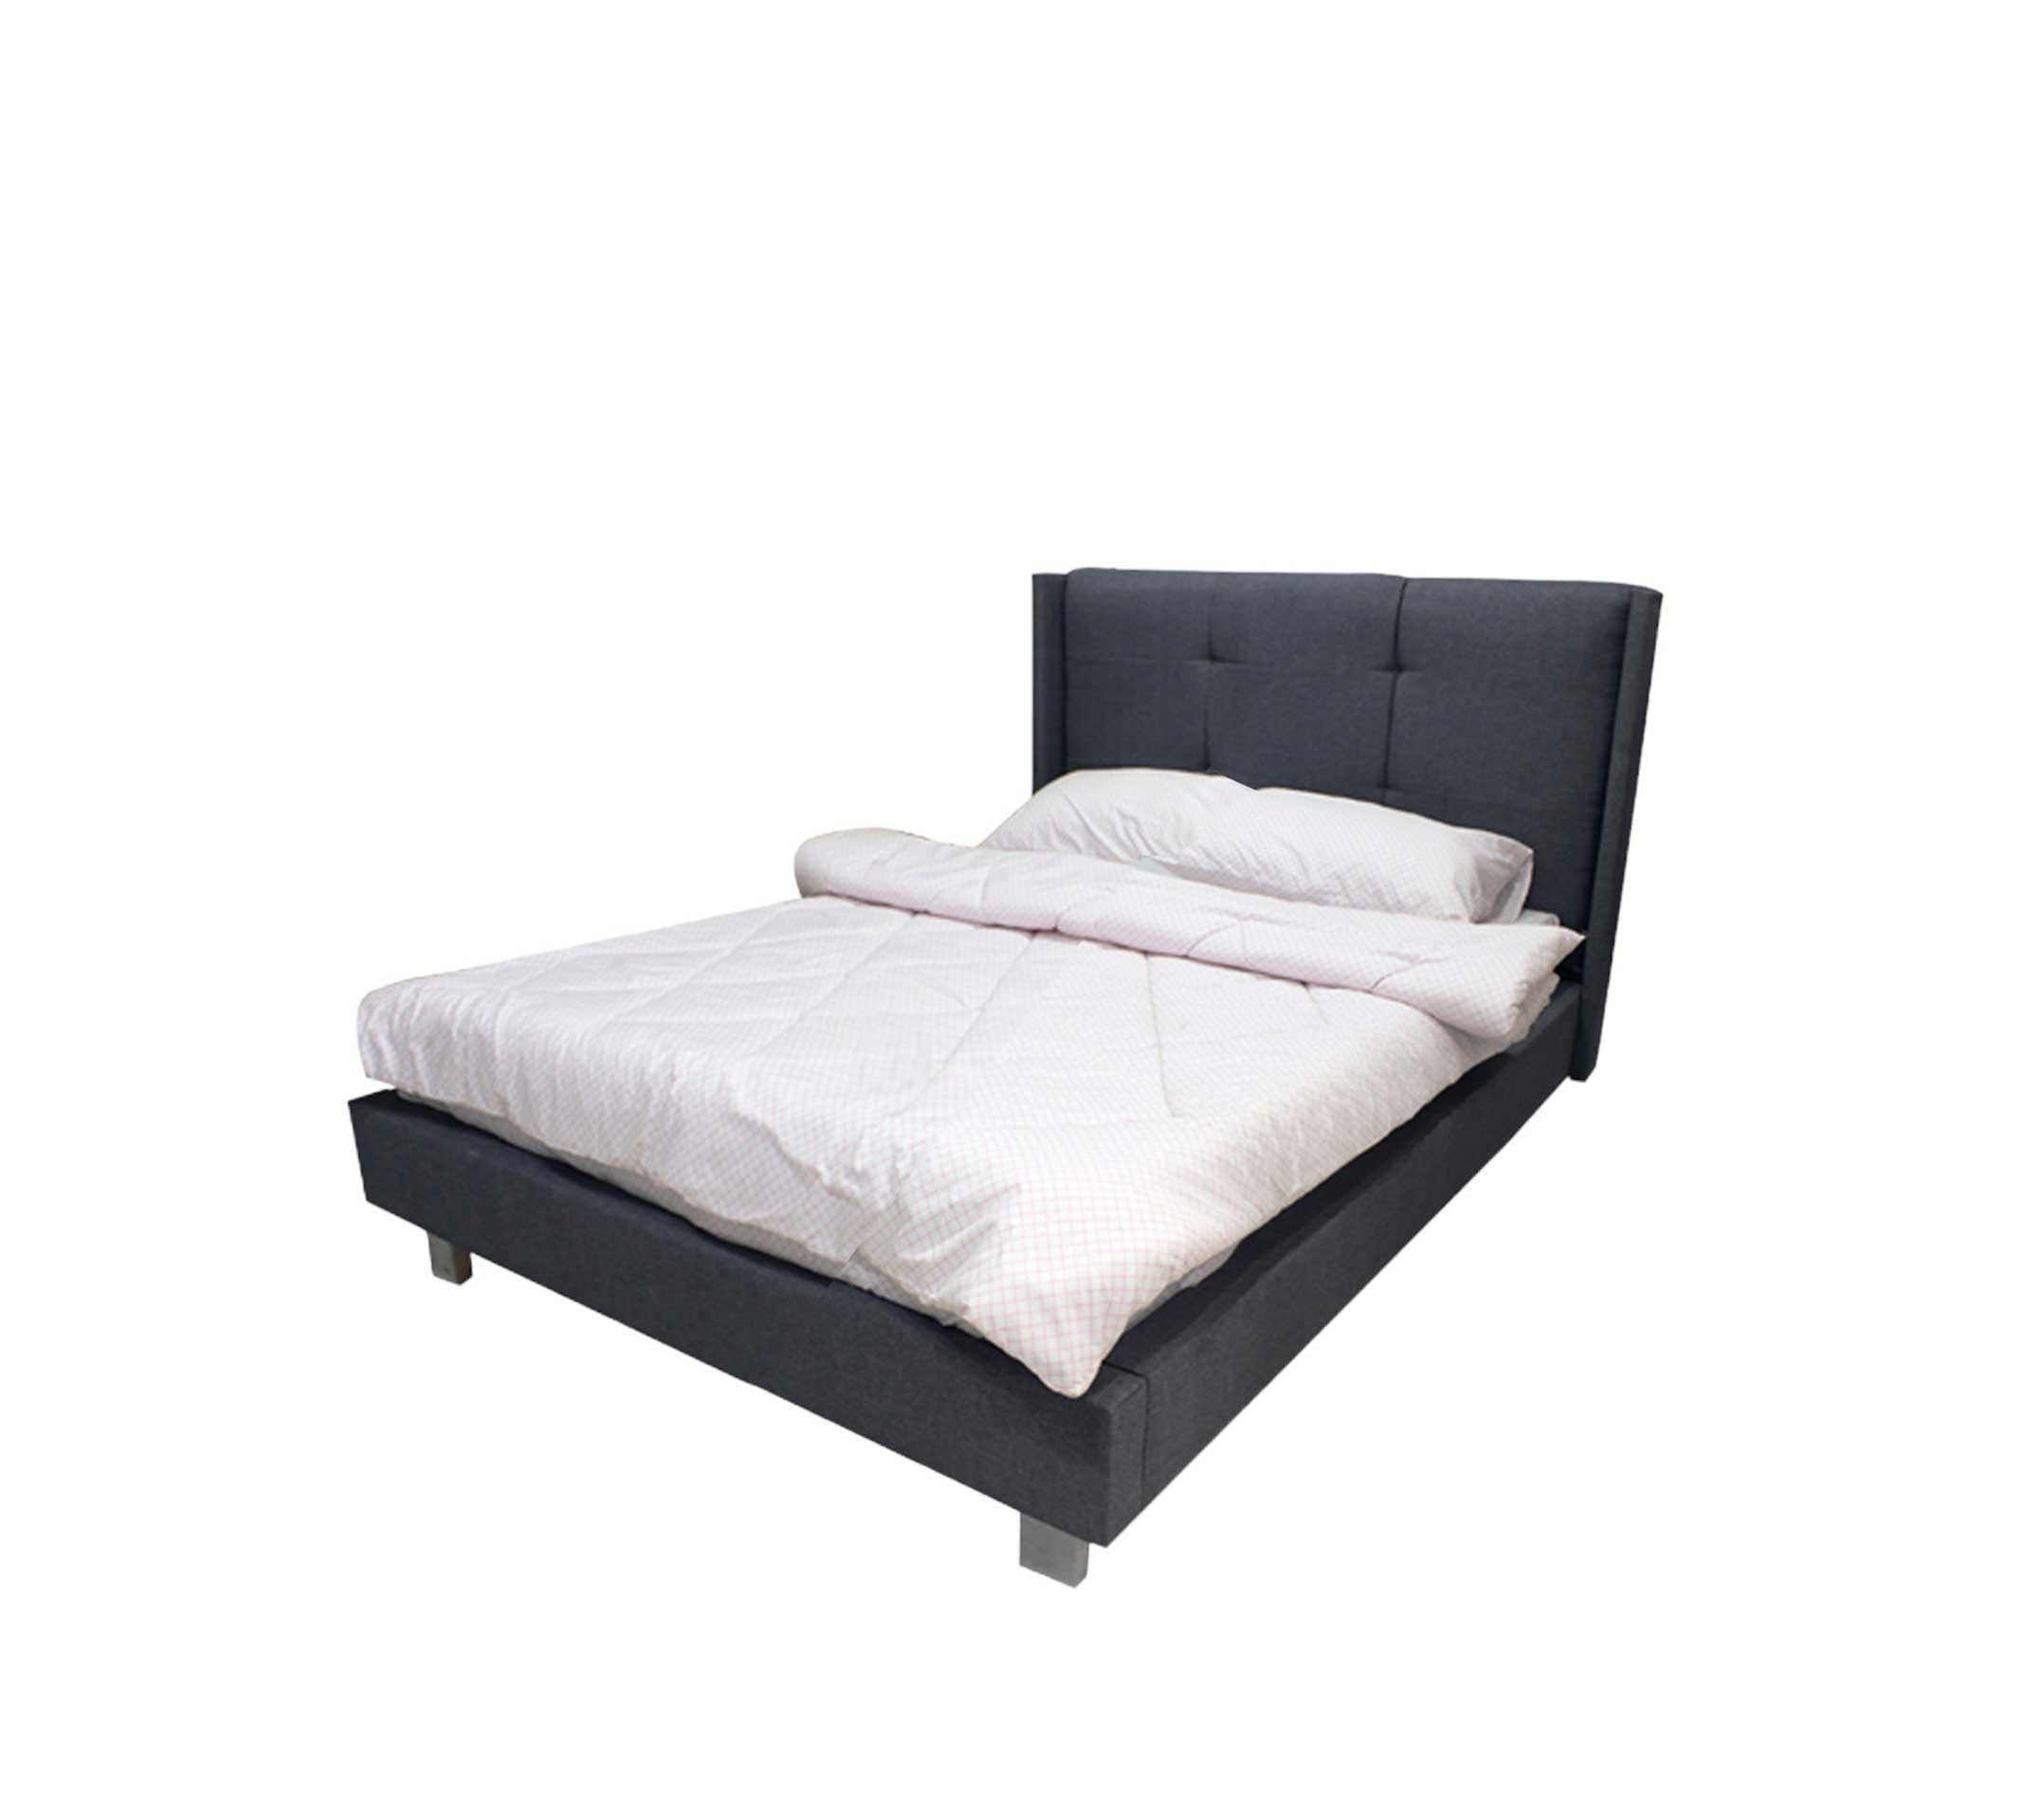 Tuffted single bed